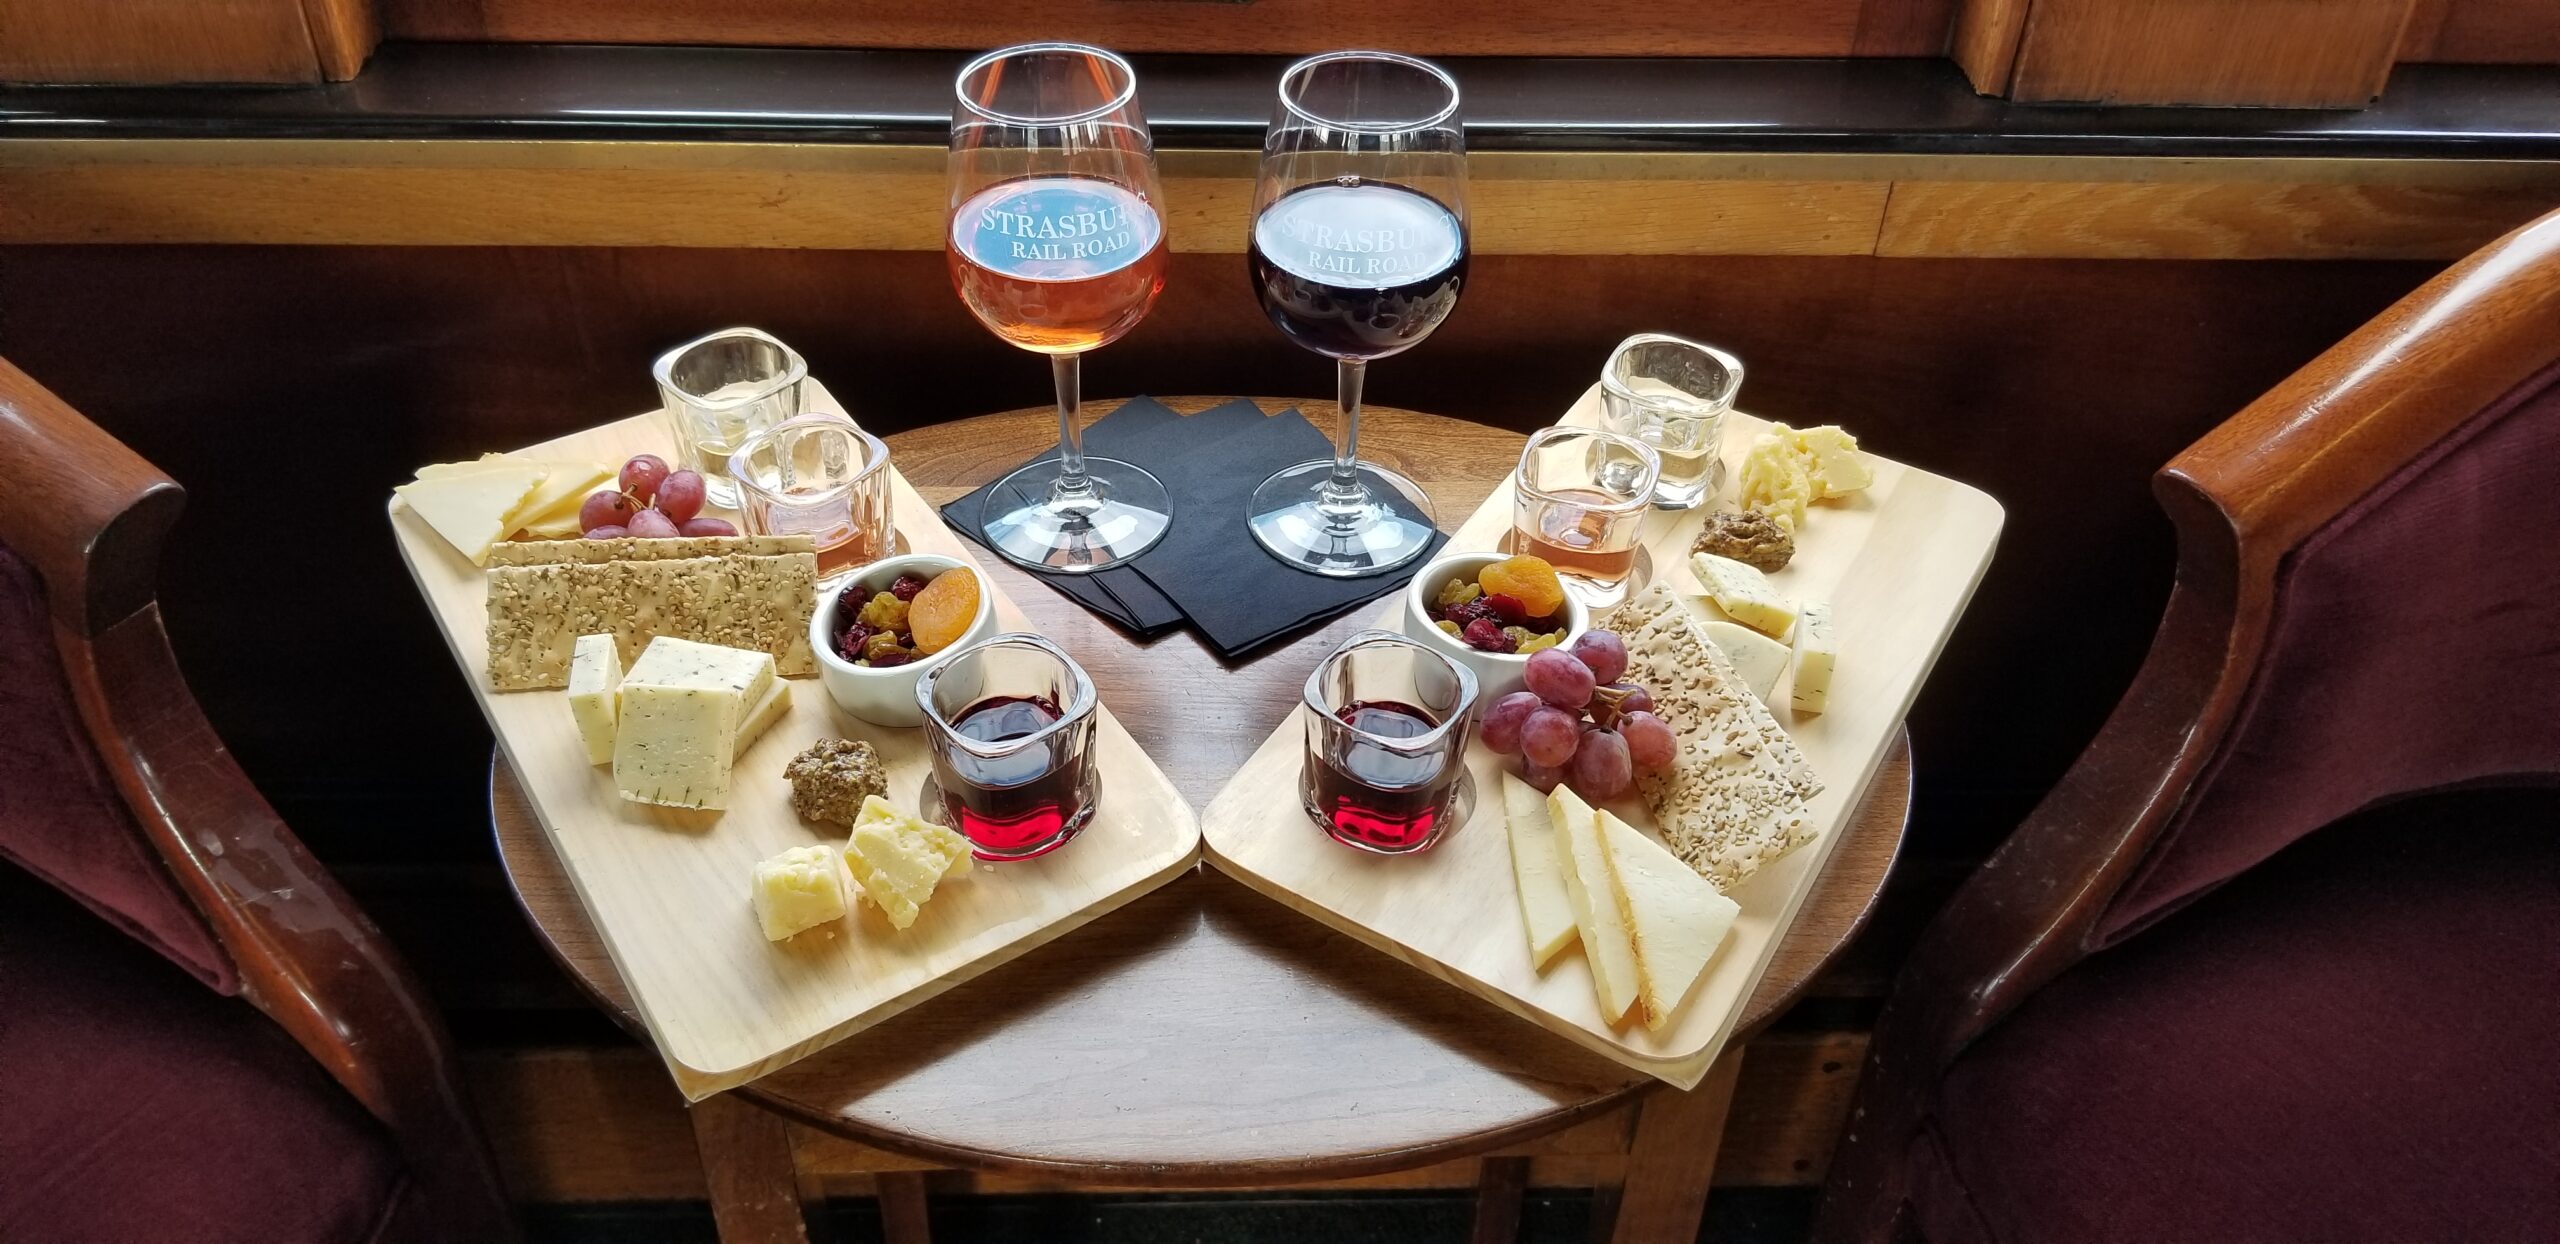 Two cheese boards and half-filled wine glasses sitting on a round table.